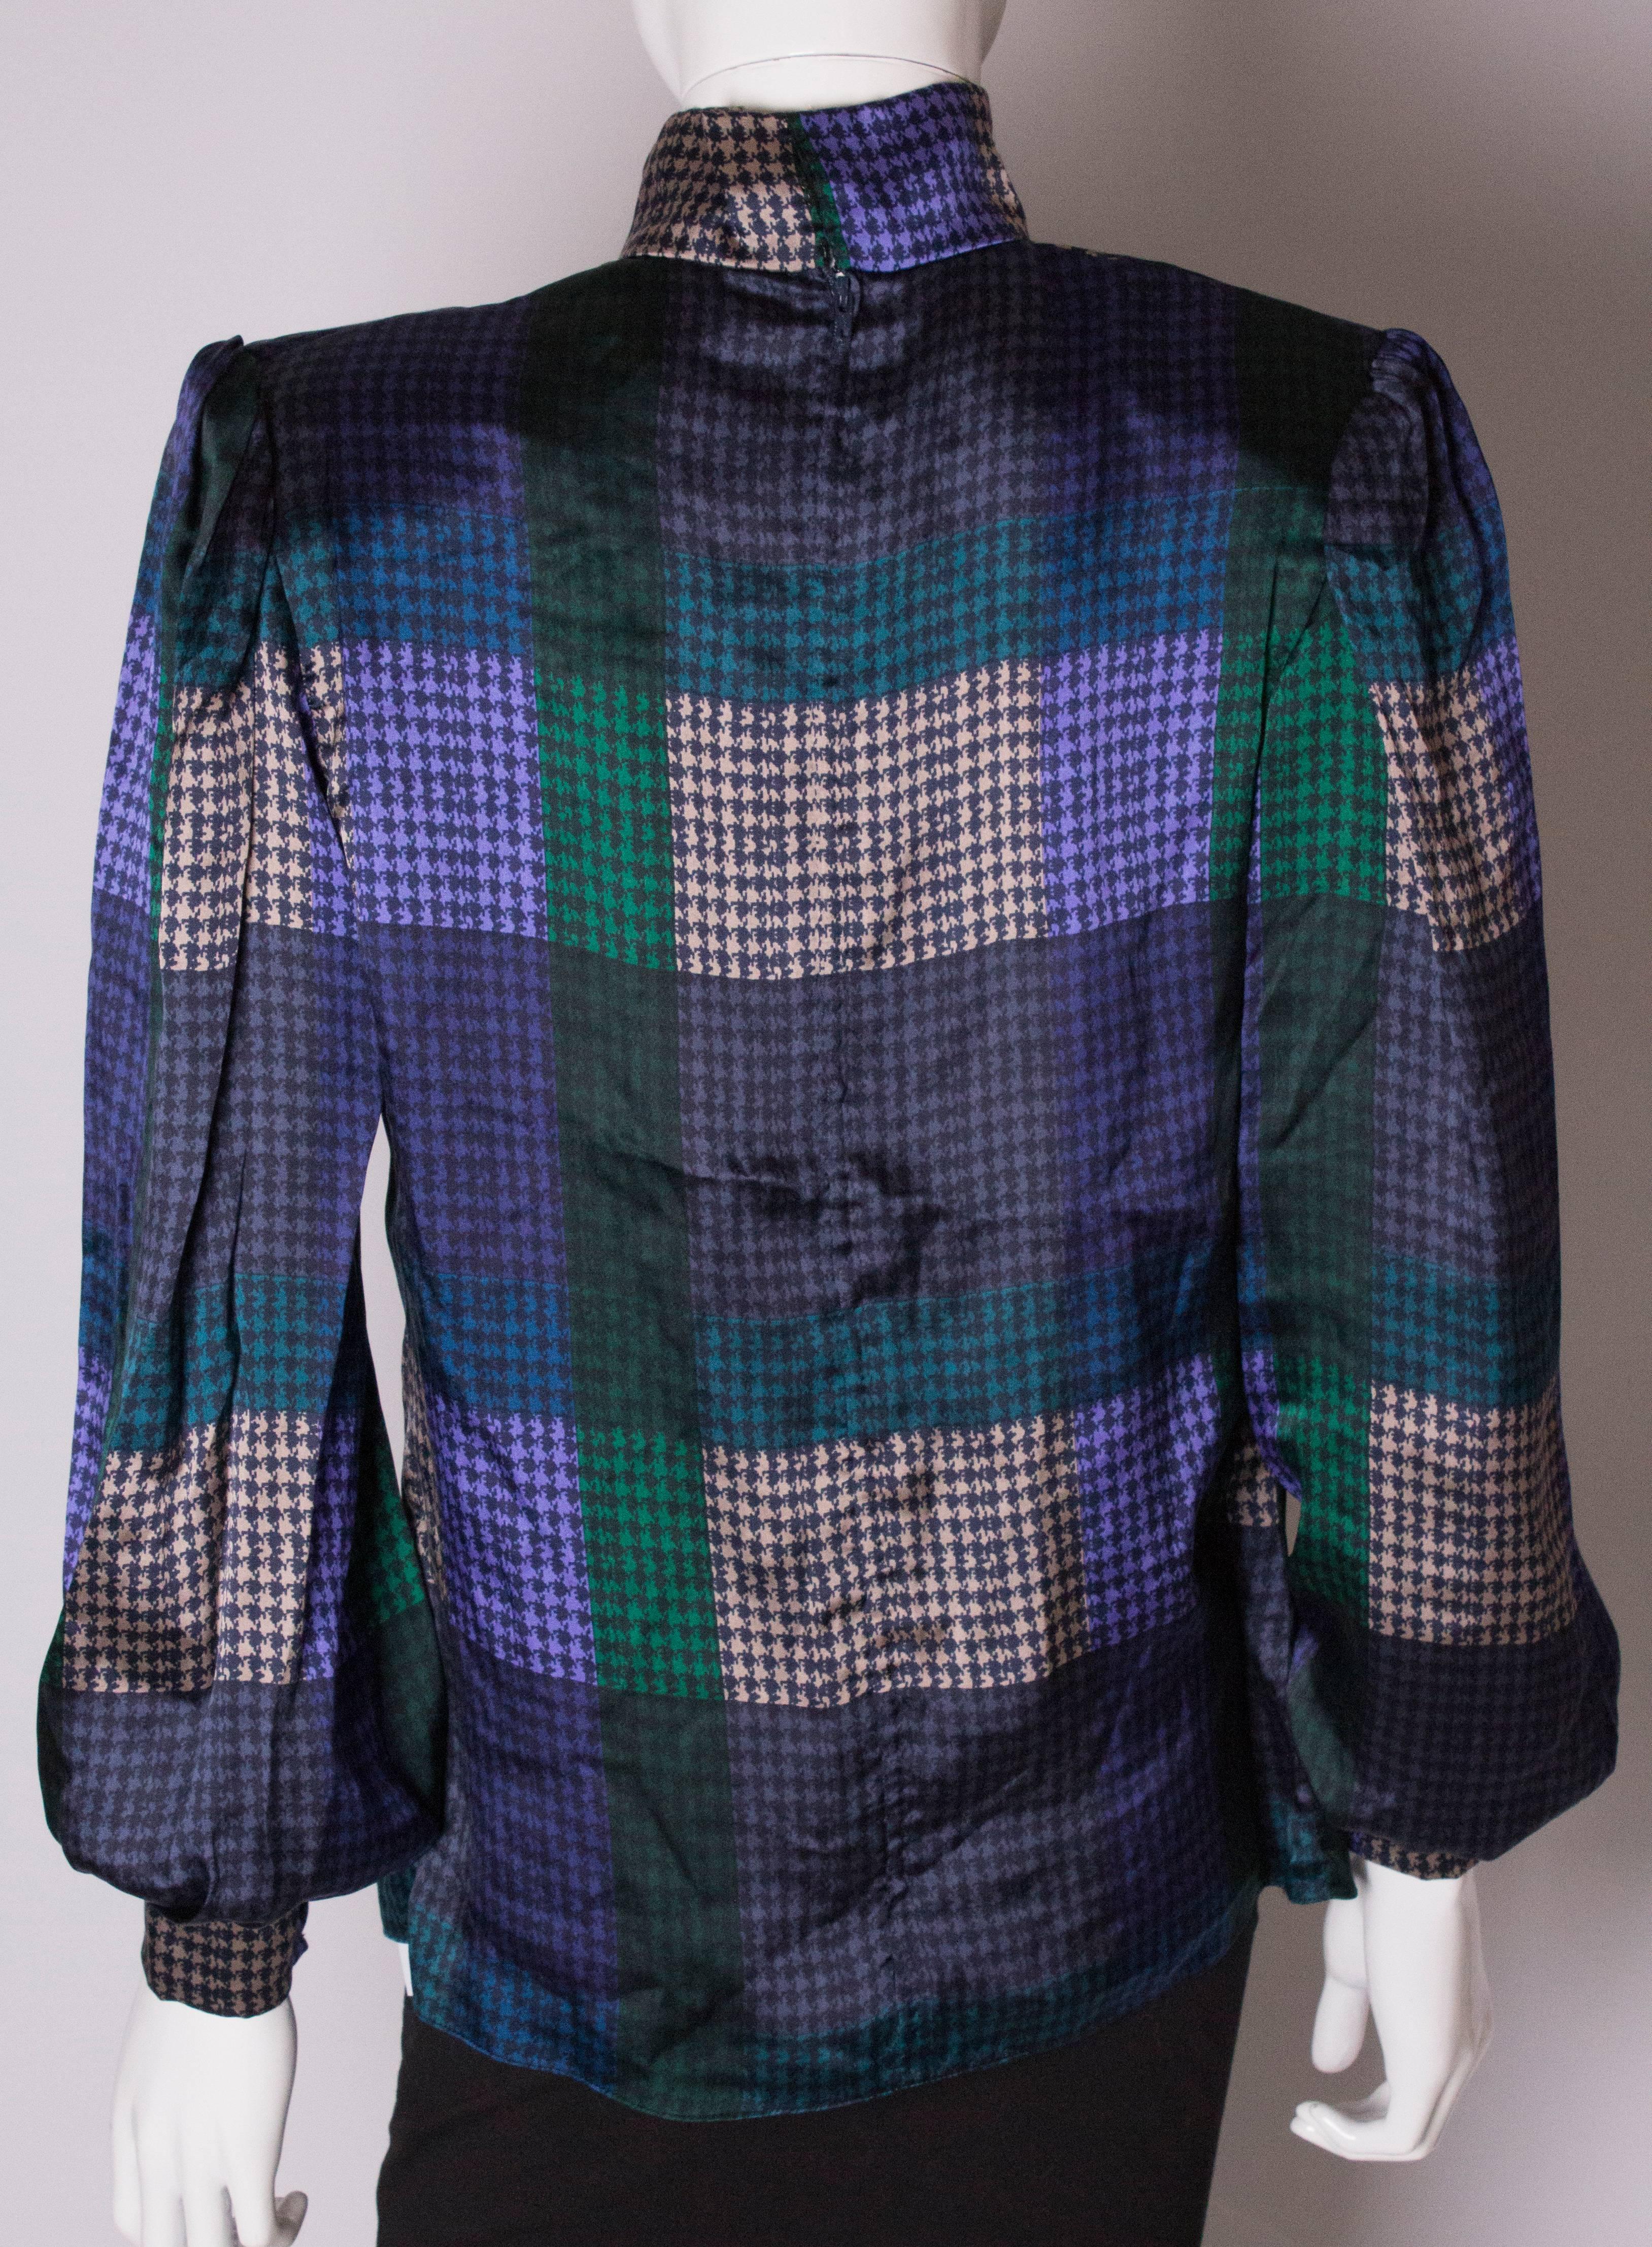  Vintage  Multicolour Silk Blouse by Donald Campbell For Sale 3